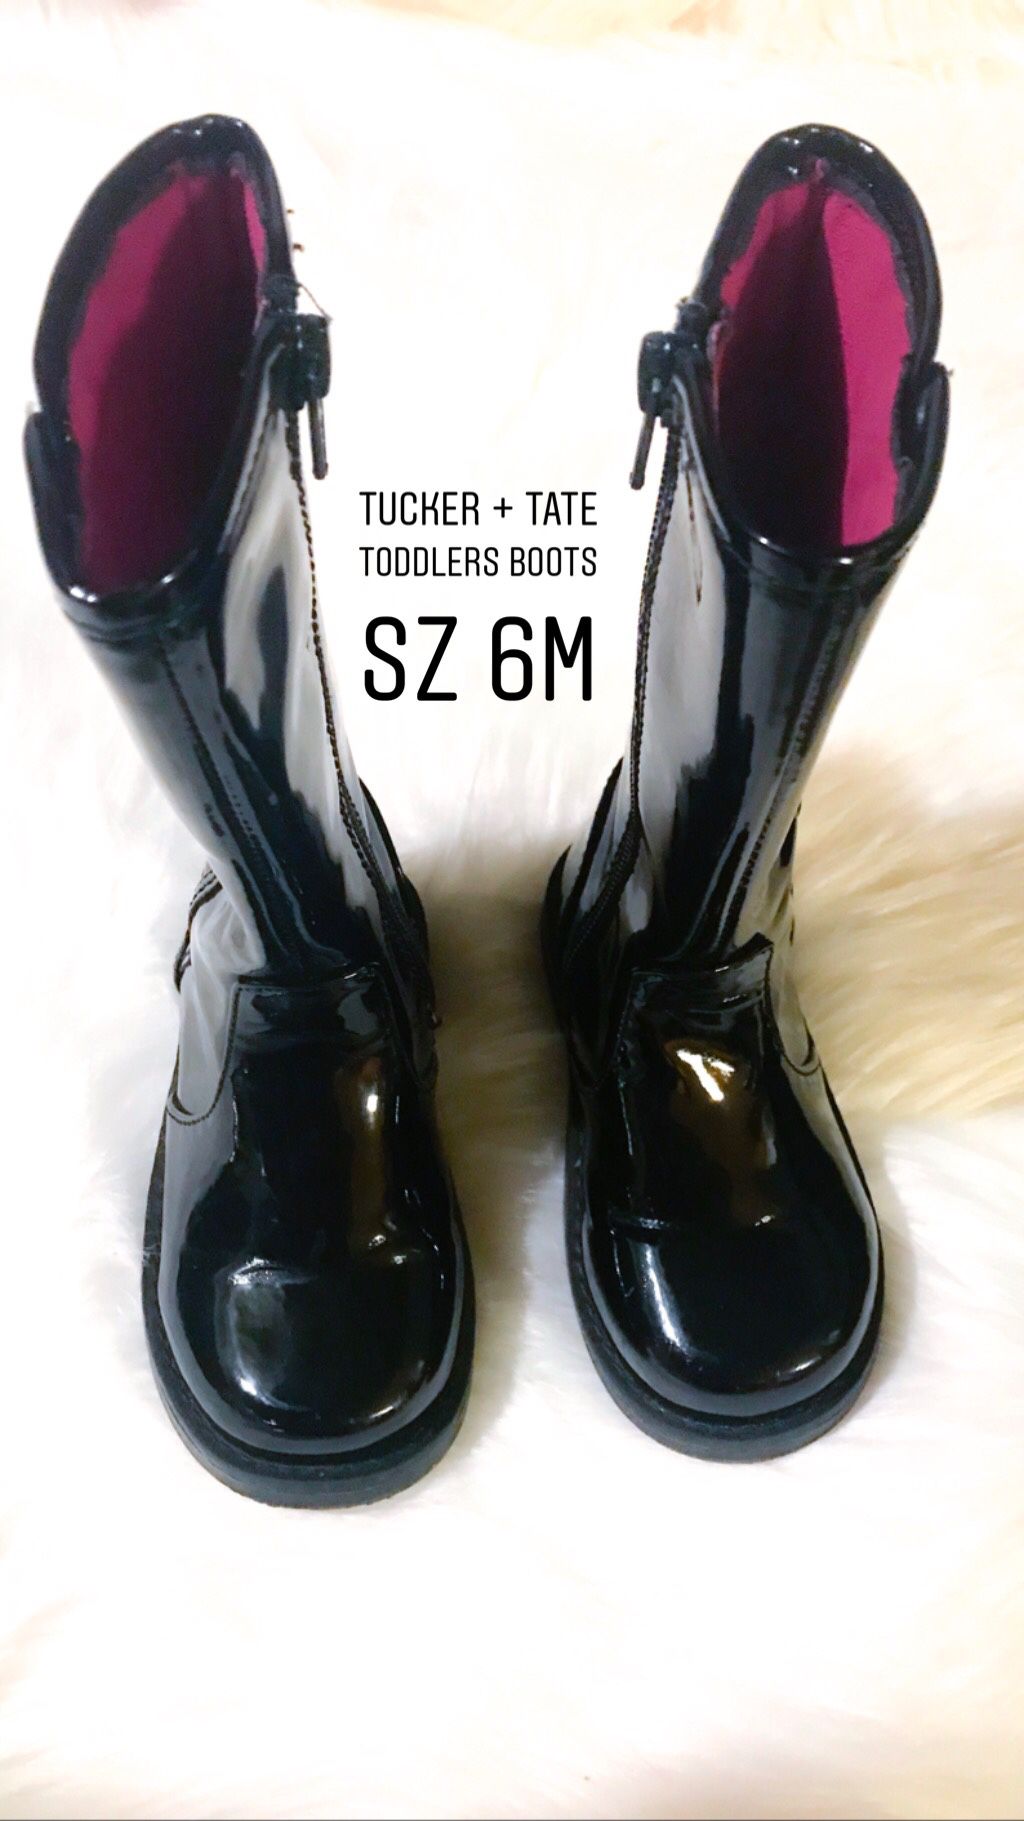 Tucker & Tate Nordstrom Tate Tess Black Faux Patent Toddlers Boots Size 6M ***** FIRM ON PRICE